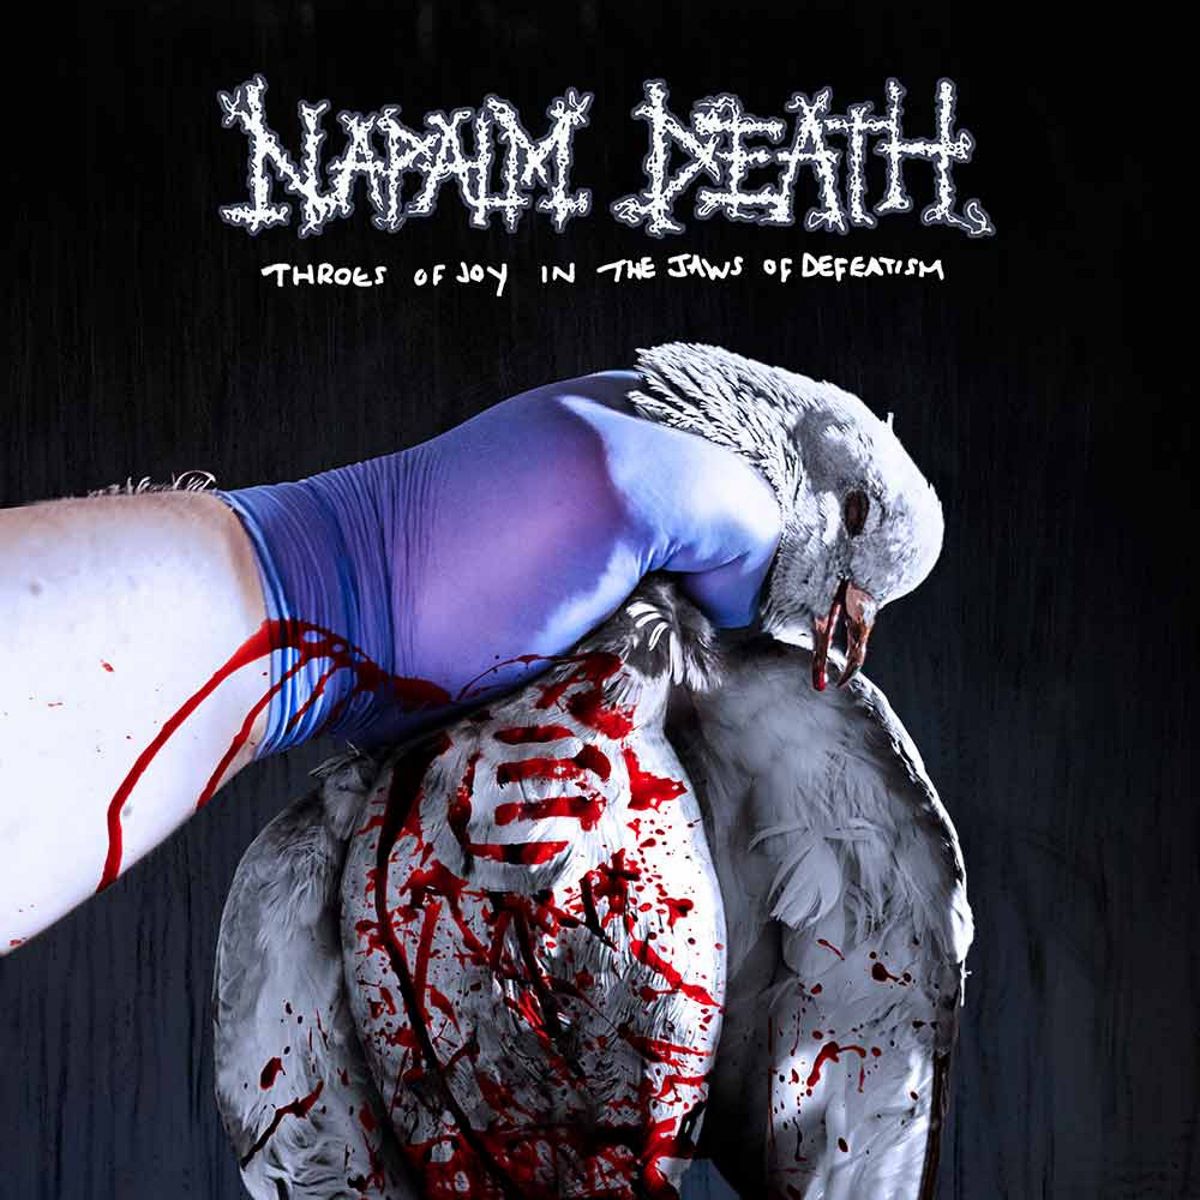 napalm death - Throes of Joy in the Jaws of Defeatism - album cover